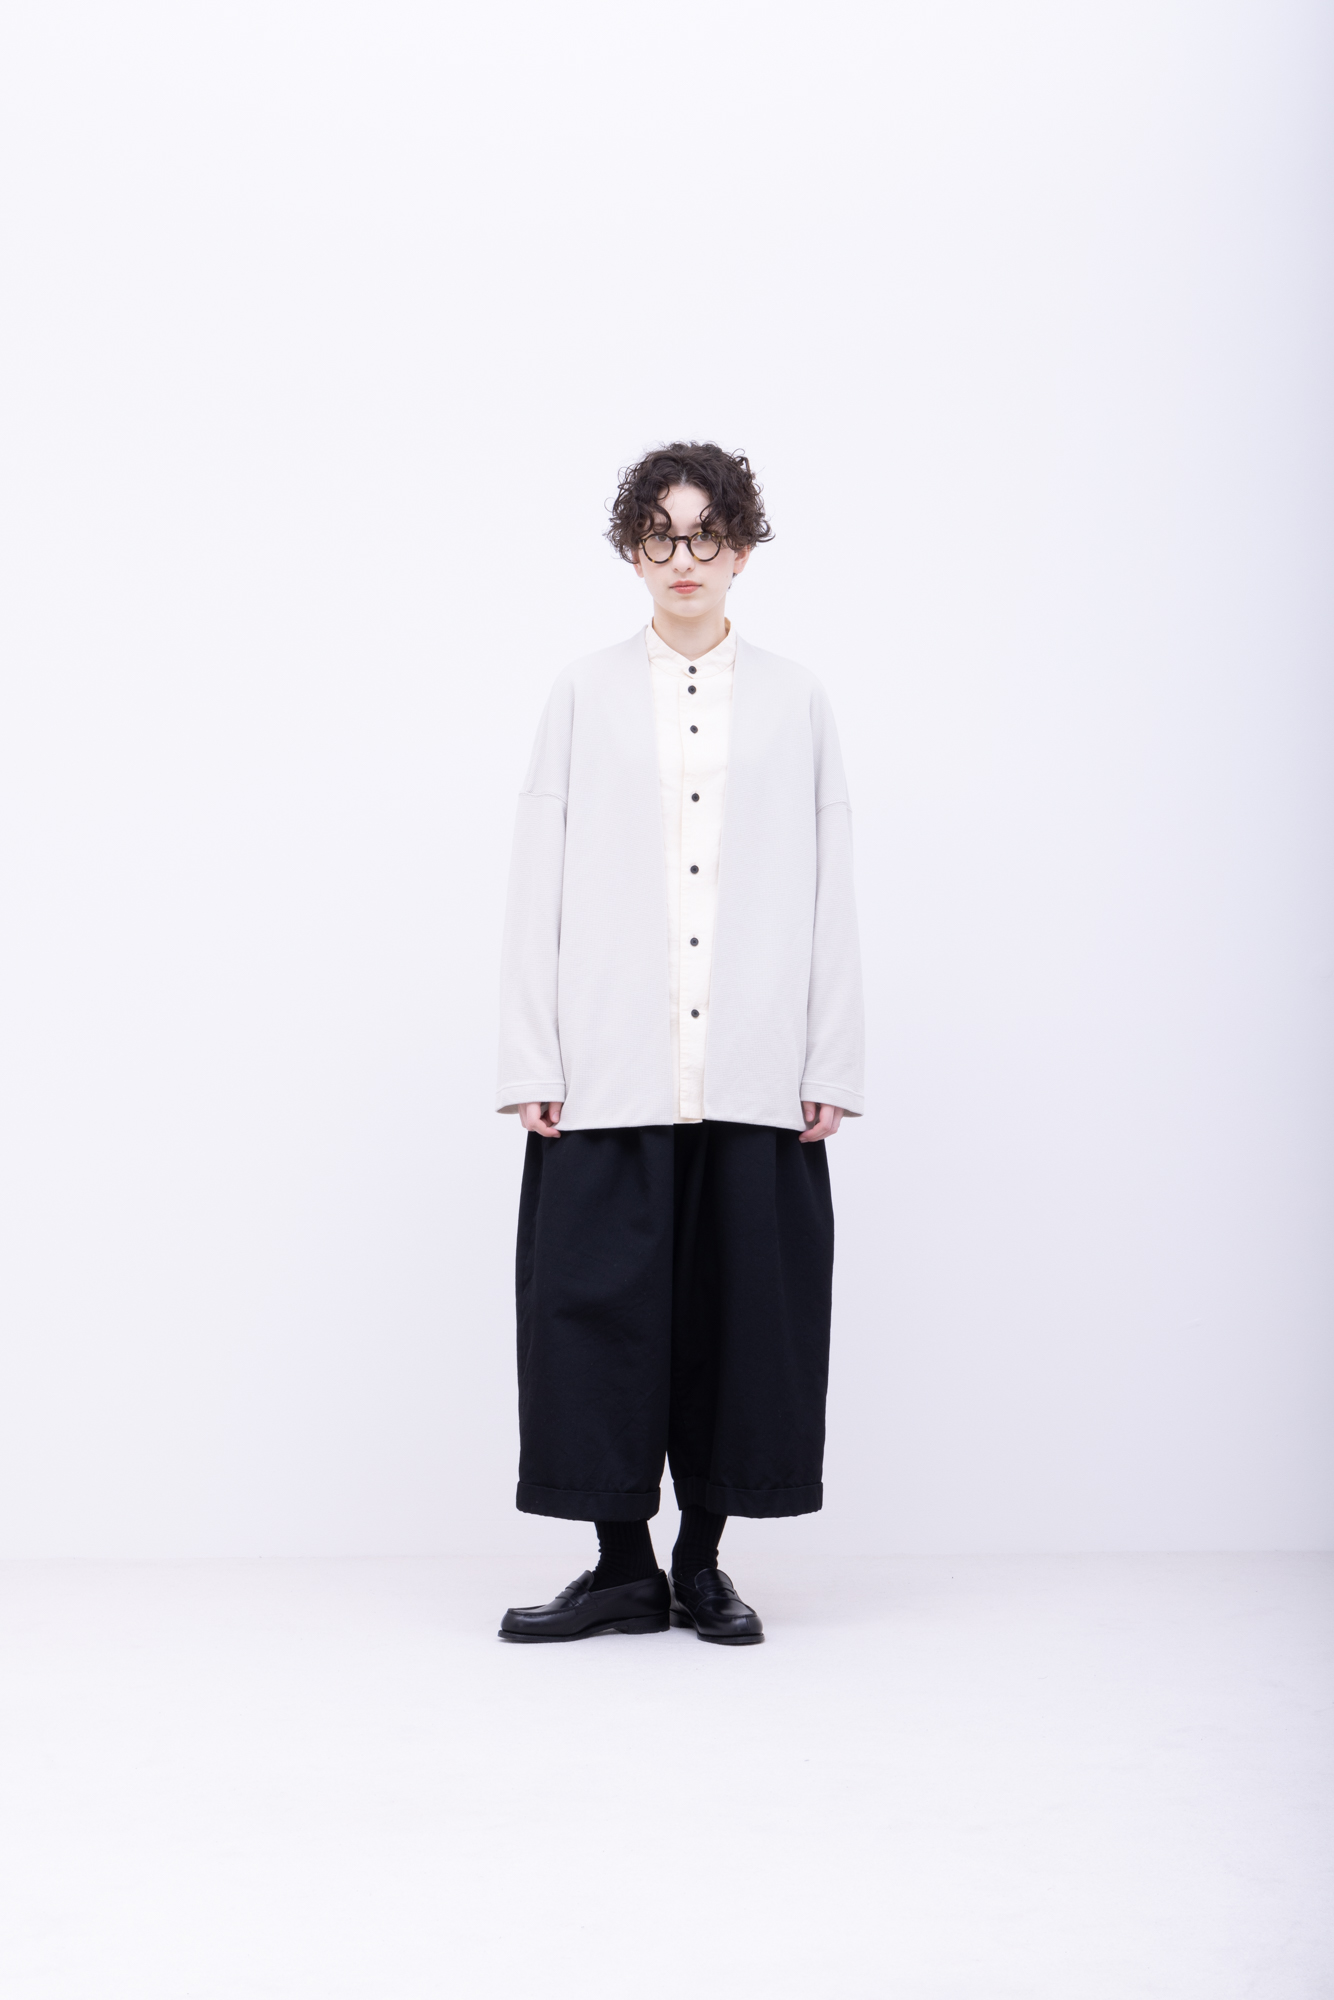 No. 002 | 2023 AW WOMENS / Model H=169cm | LOOK | FIRMUM